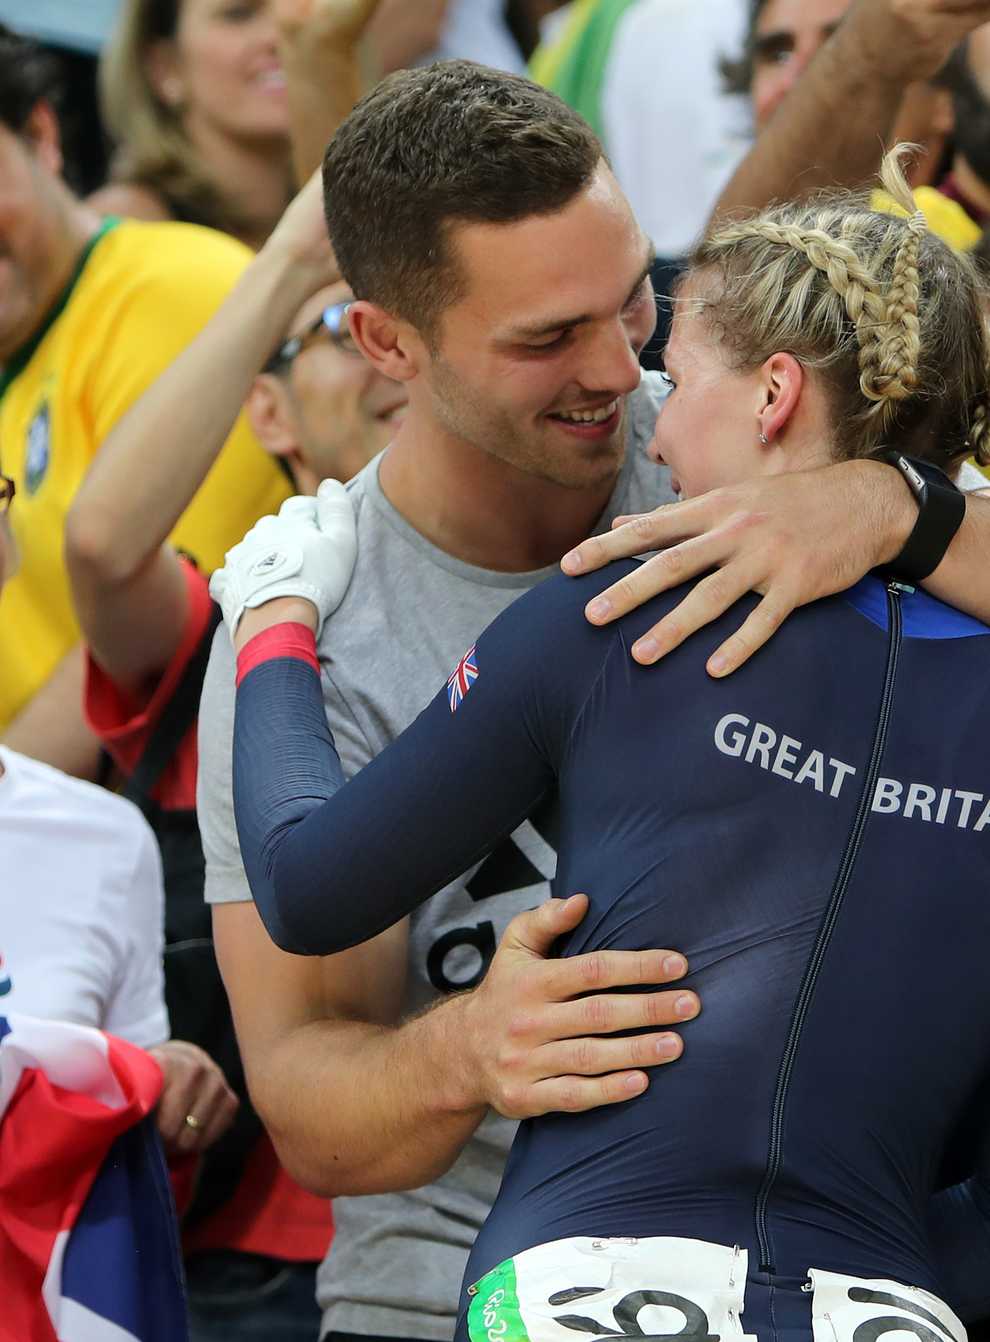 Former GB cyclist Becky North with husband George, who plays rugby for Wales (PA Images)